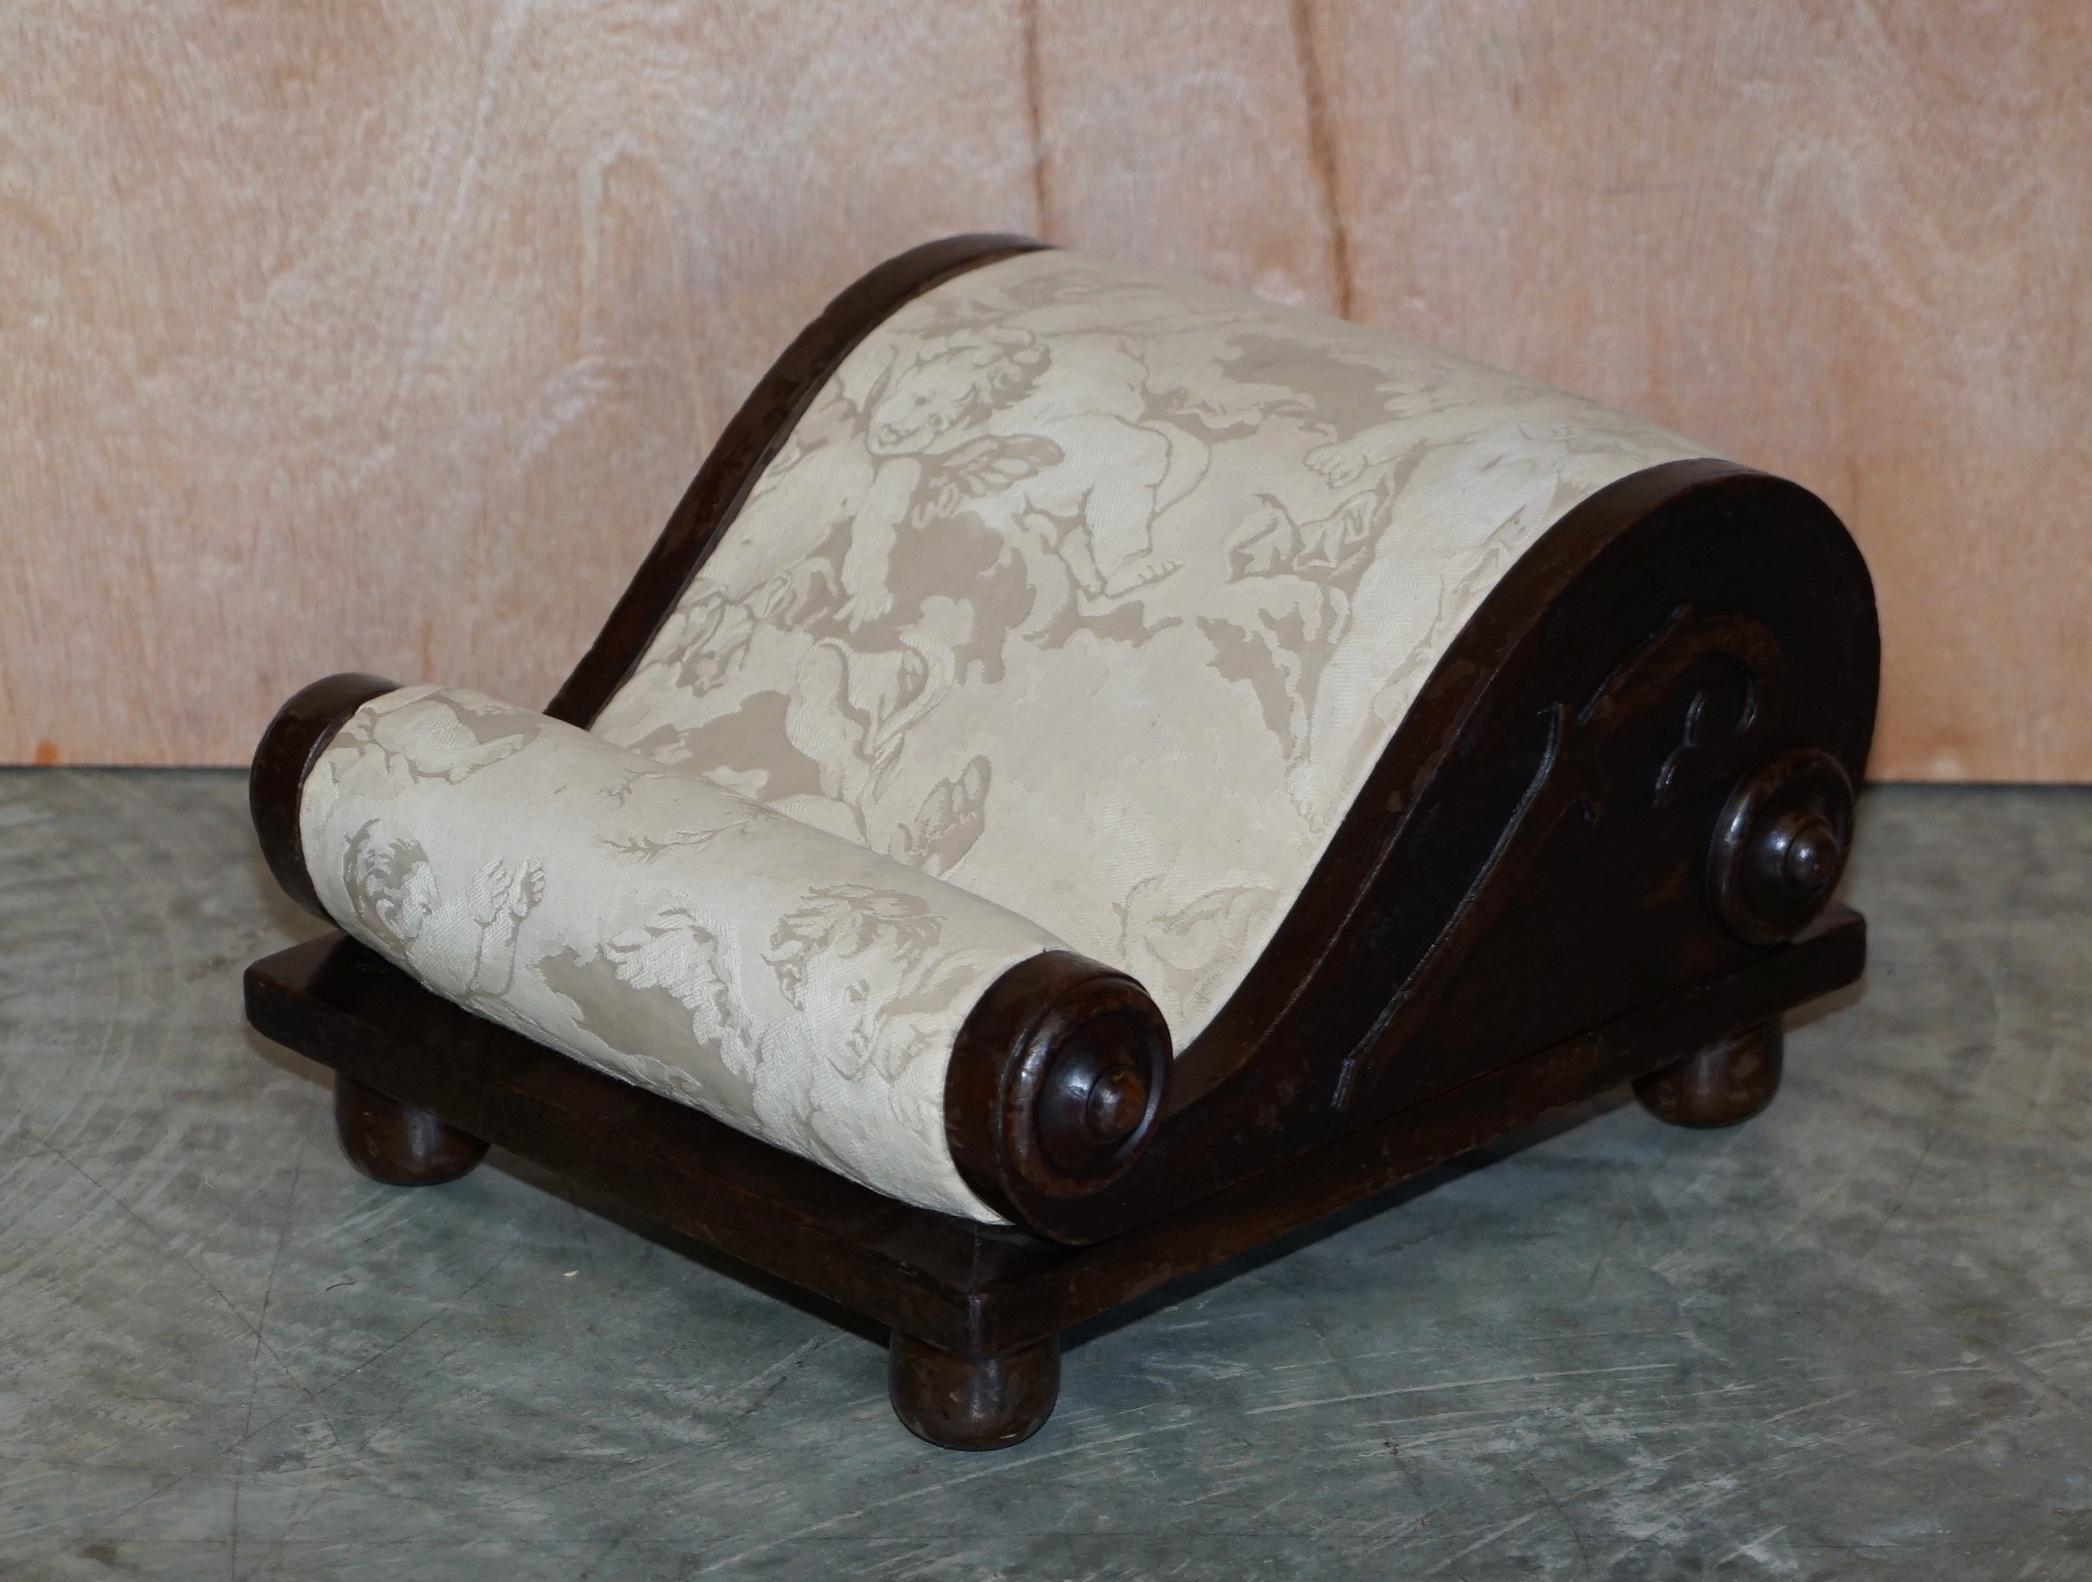 We are delighted to offer for sale this stunning original Georgian circa 1800 scroll footstool with Cherub upholstery

What a find! This has to be the most sculptural and ornate little footstool I have ever seen, the lines are amazing from every